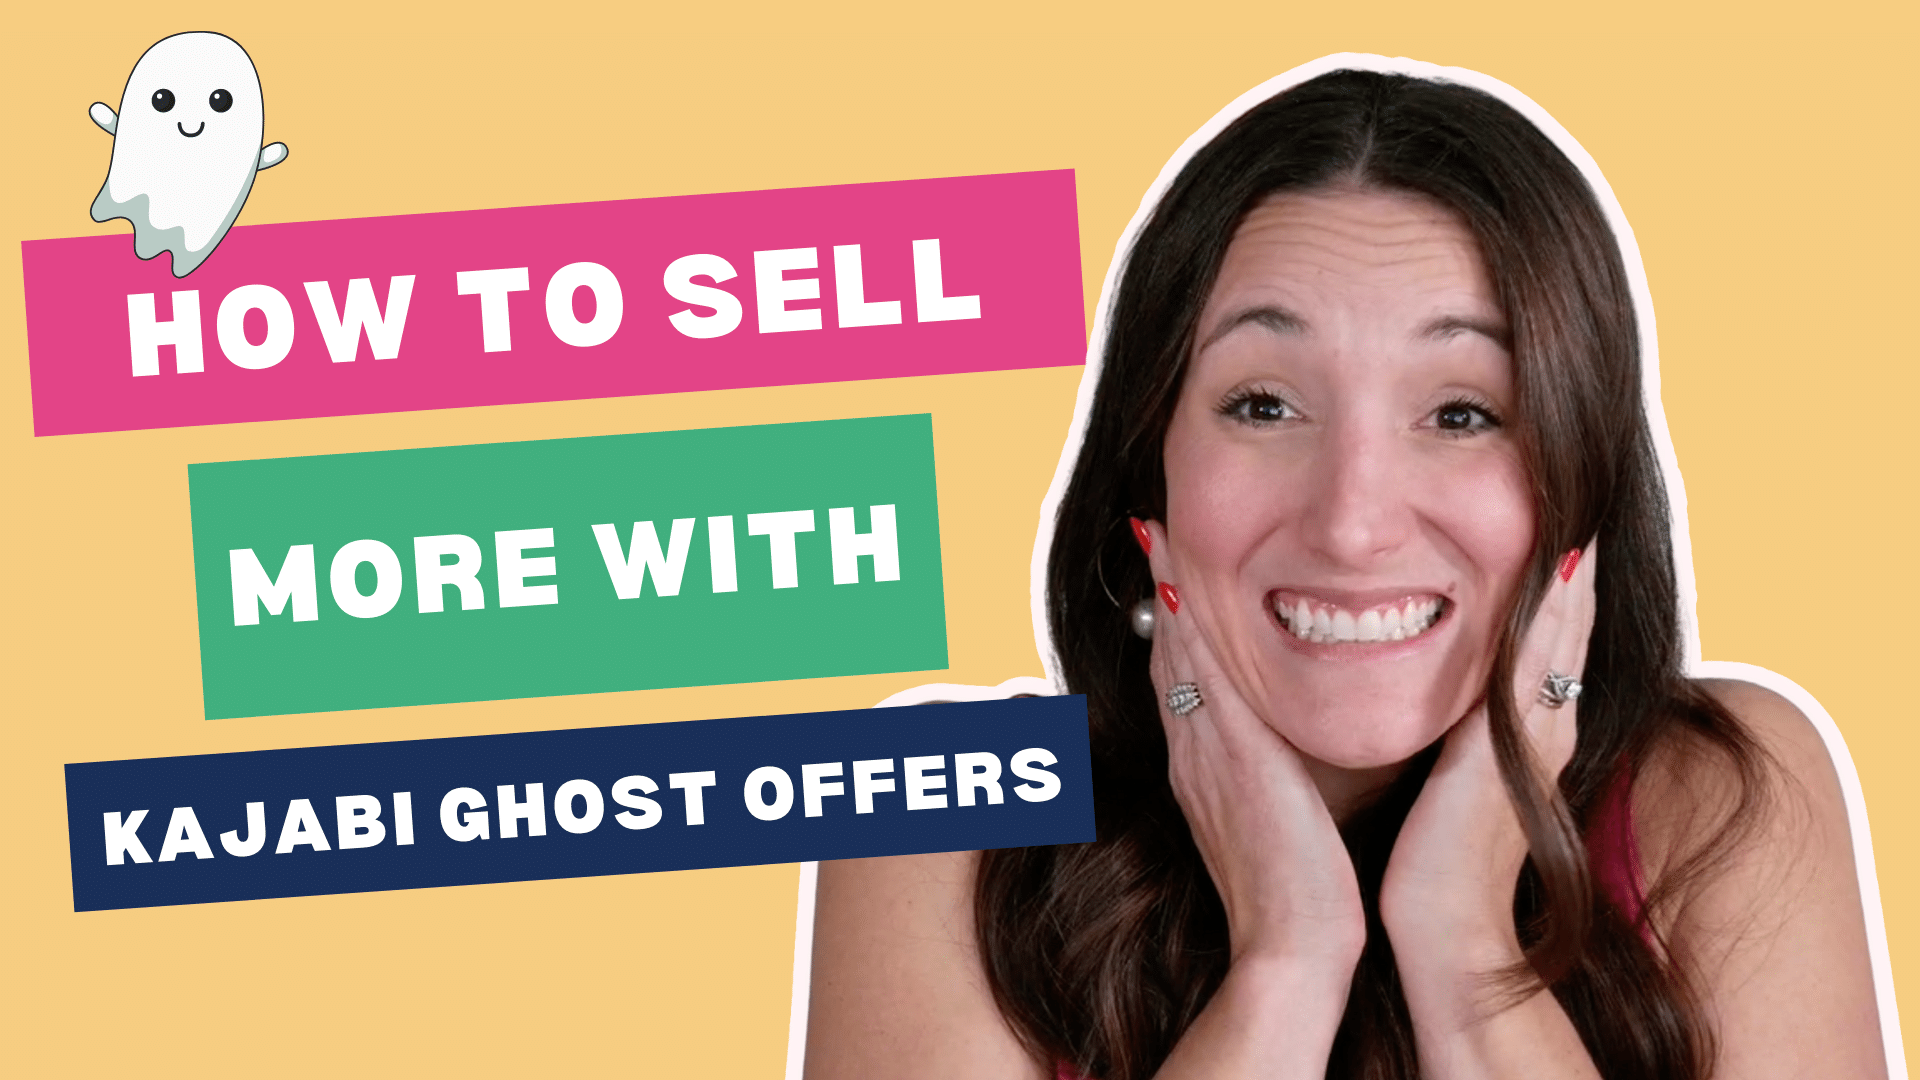 How to sell more digital products with Kajabi Ghost Offers: tips to sell your products online without paying more money